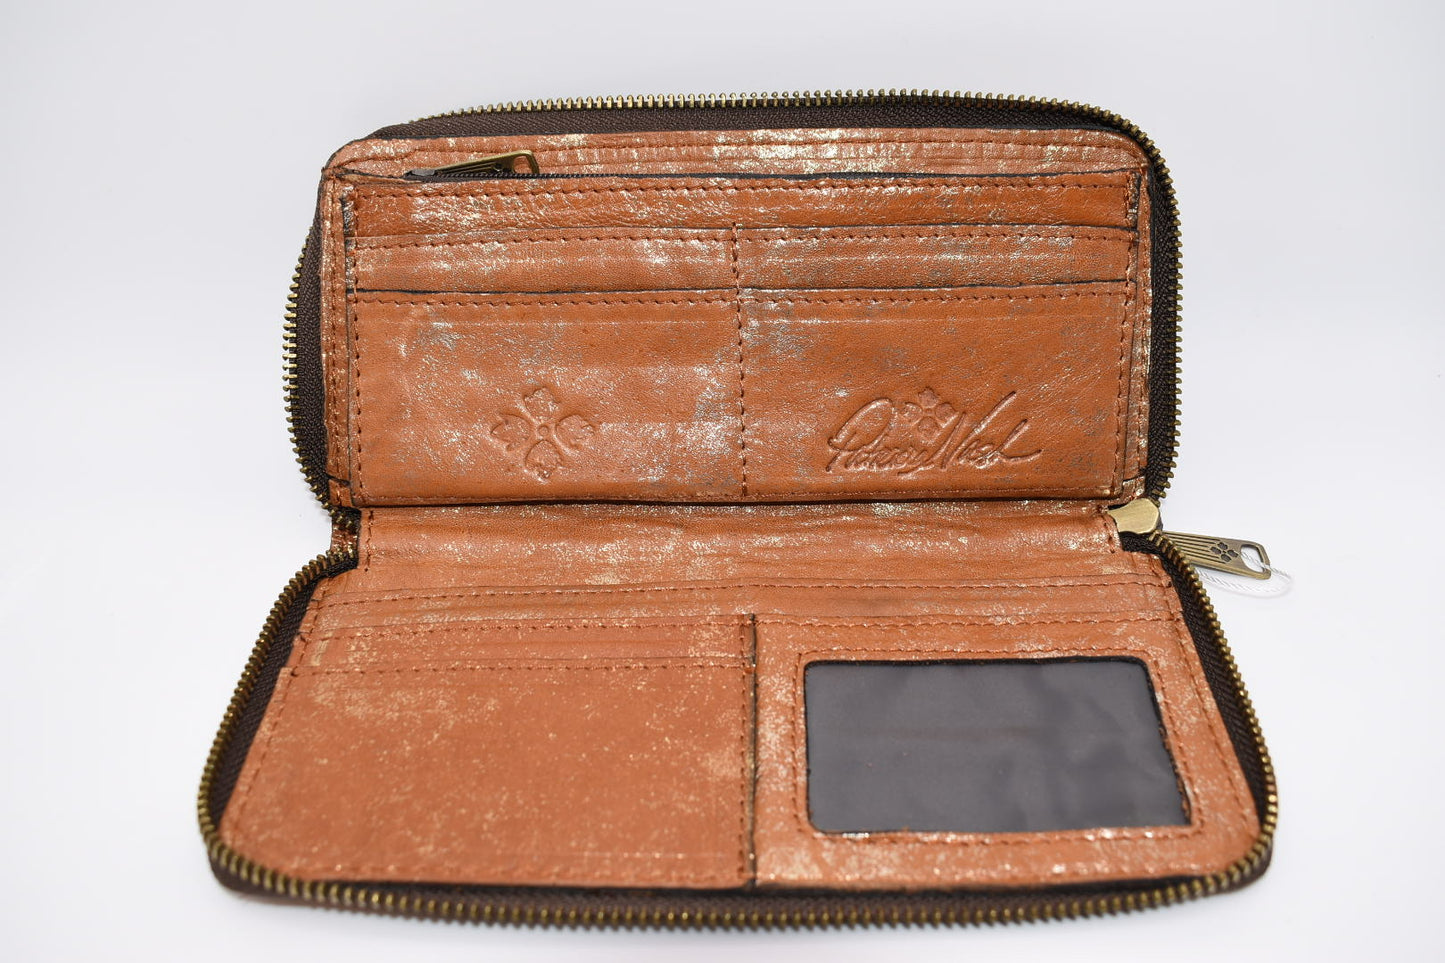 Patricia Nash Laurie Leather Wallet in Tan & Gold Shimmer